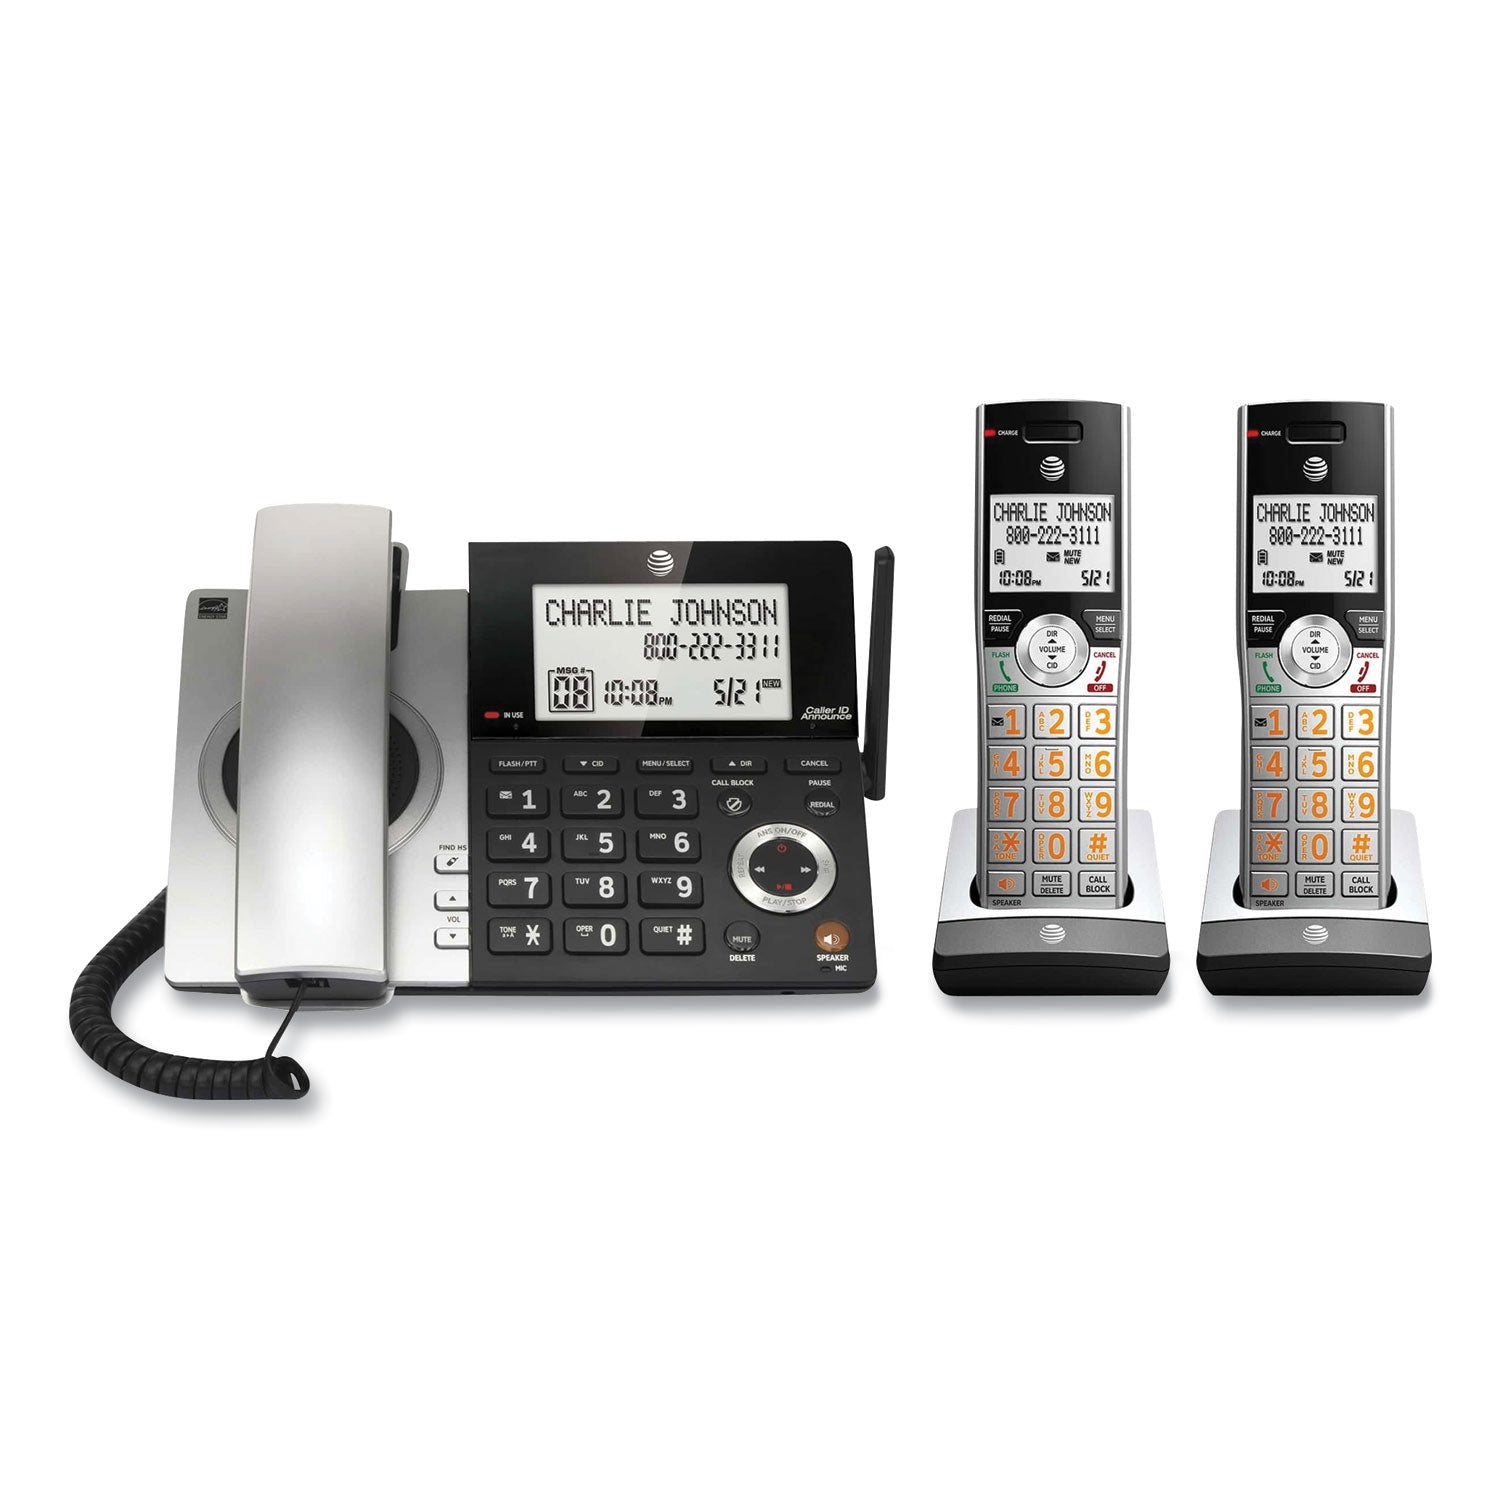 cl84207-corded-cordless-phone-corded-base-station-and-2-additional-handsets-black-silver_attcl84207 - 1